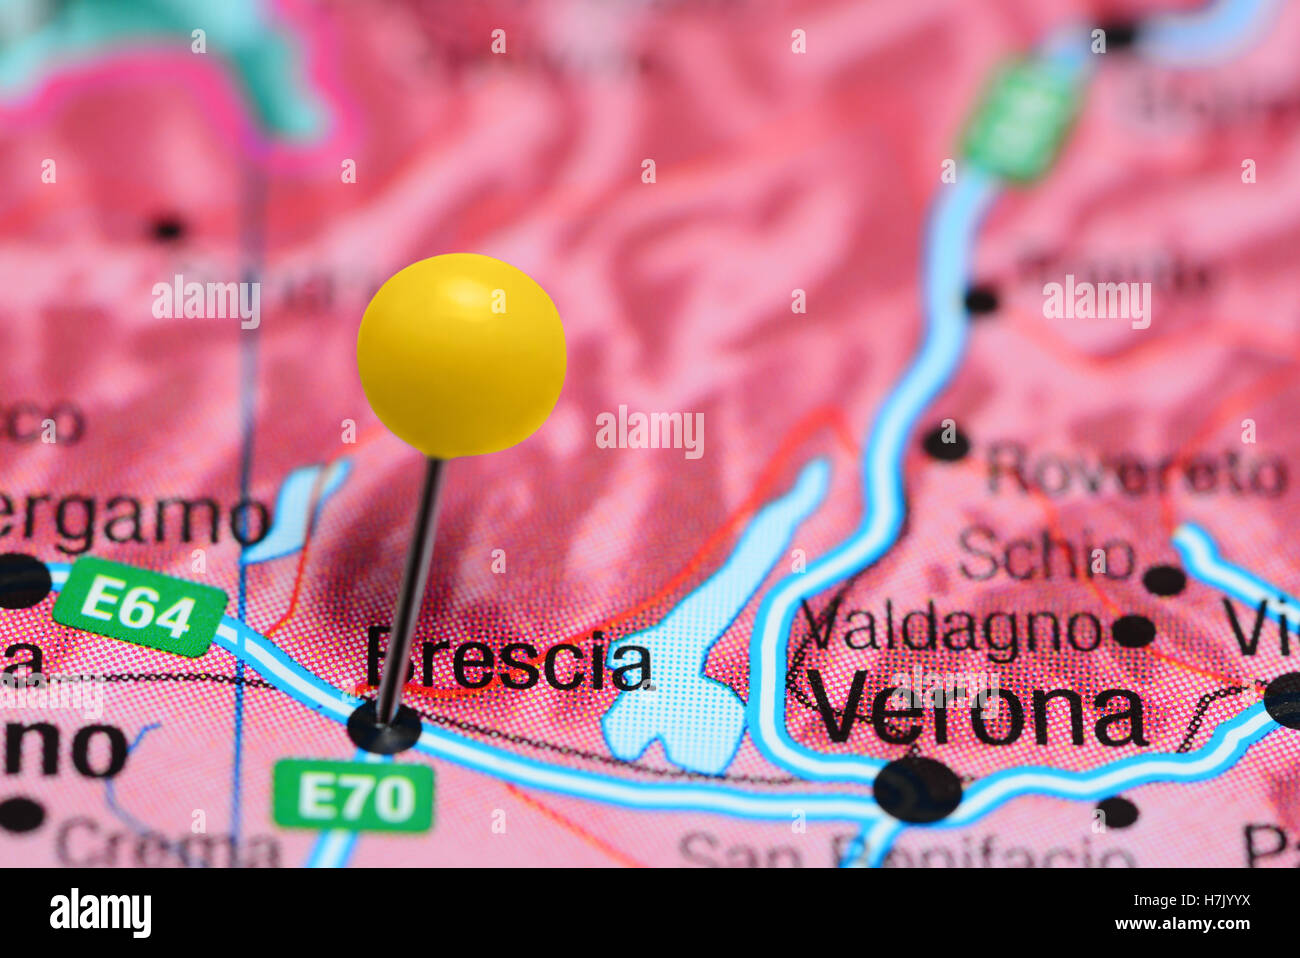 Brescia pinned on a map of Italy Stock Photo